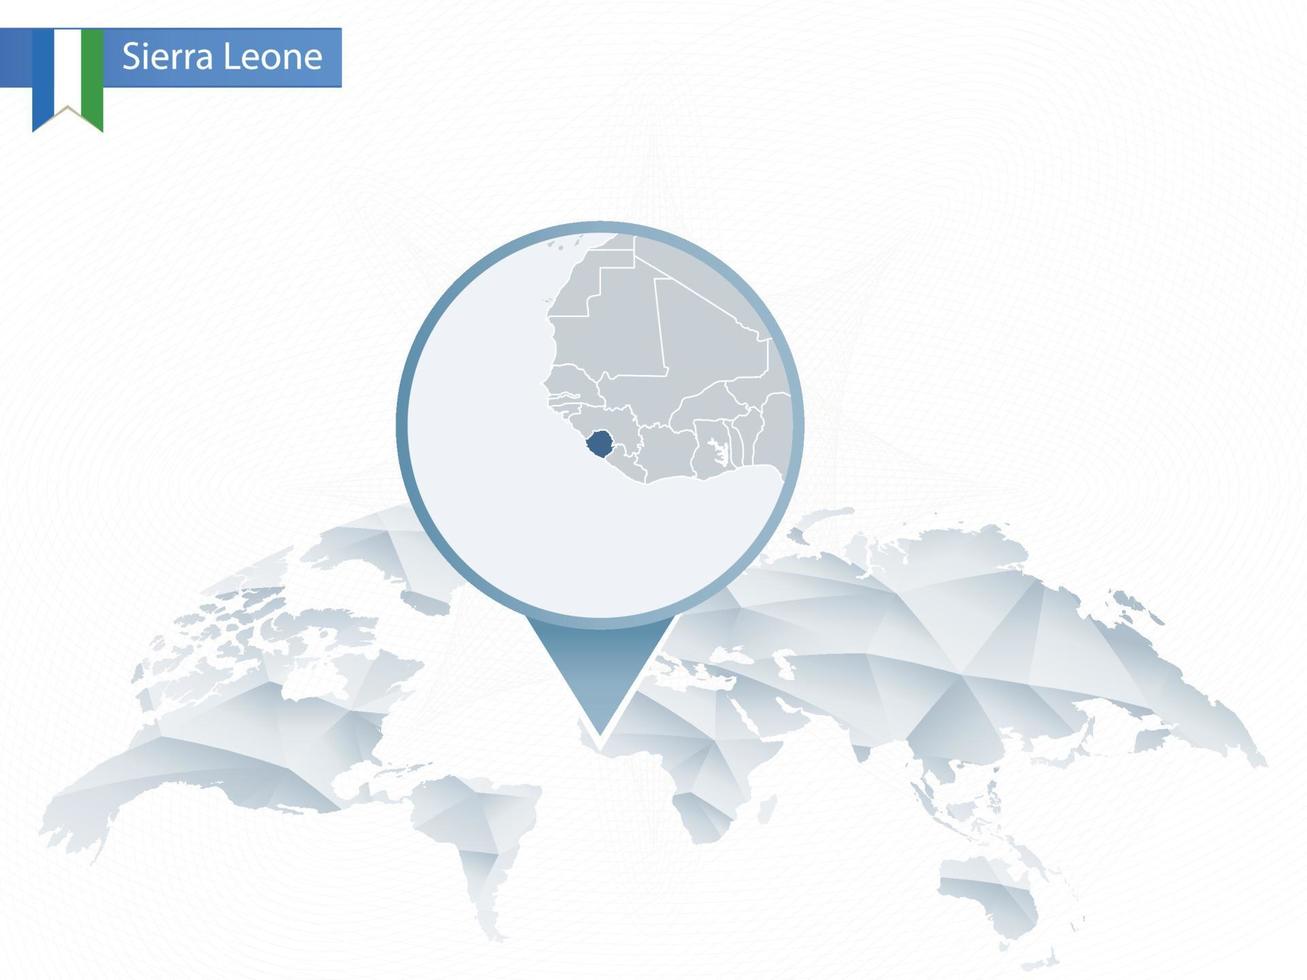 Abstract rounded World Map with pinned detailed Sierra Leone map. vector